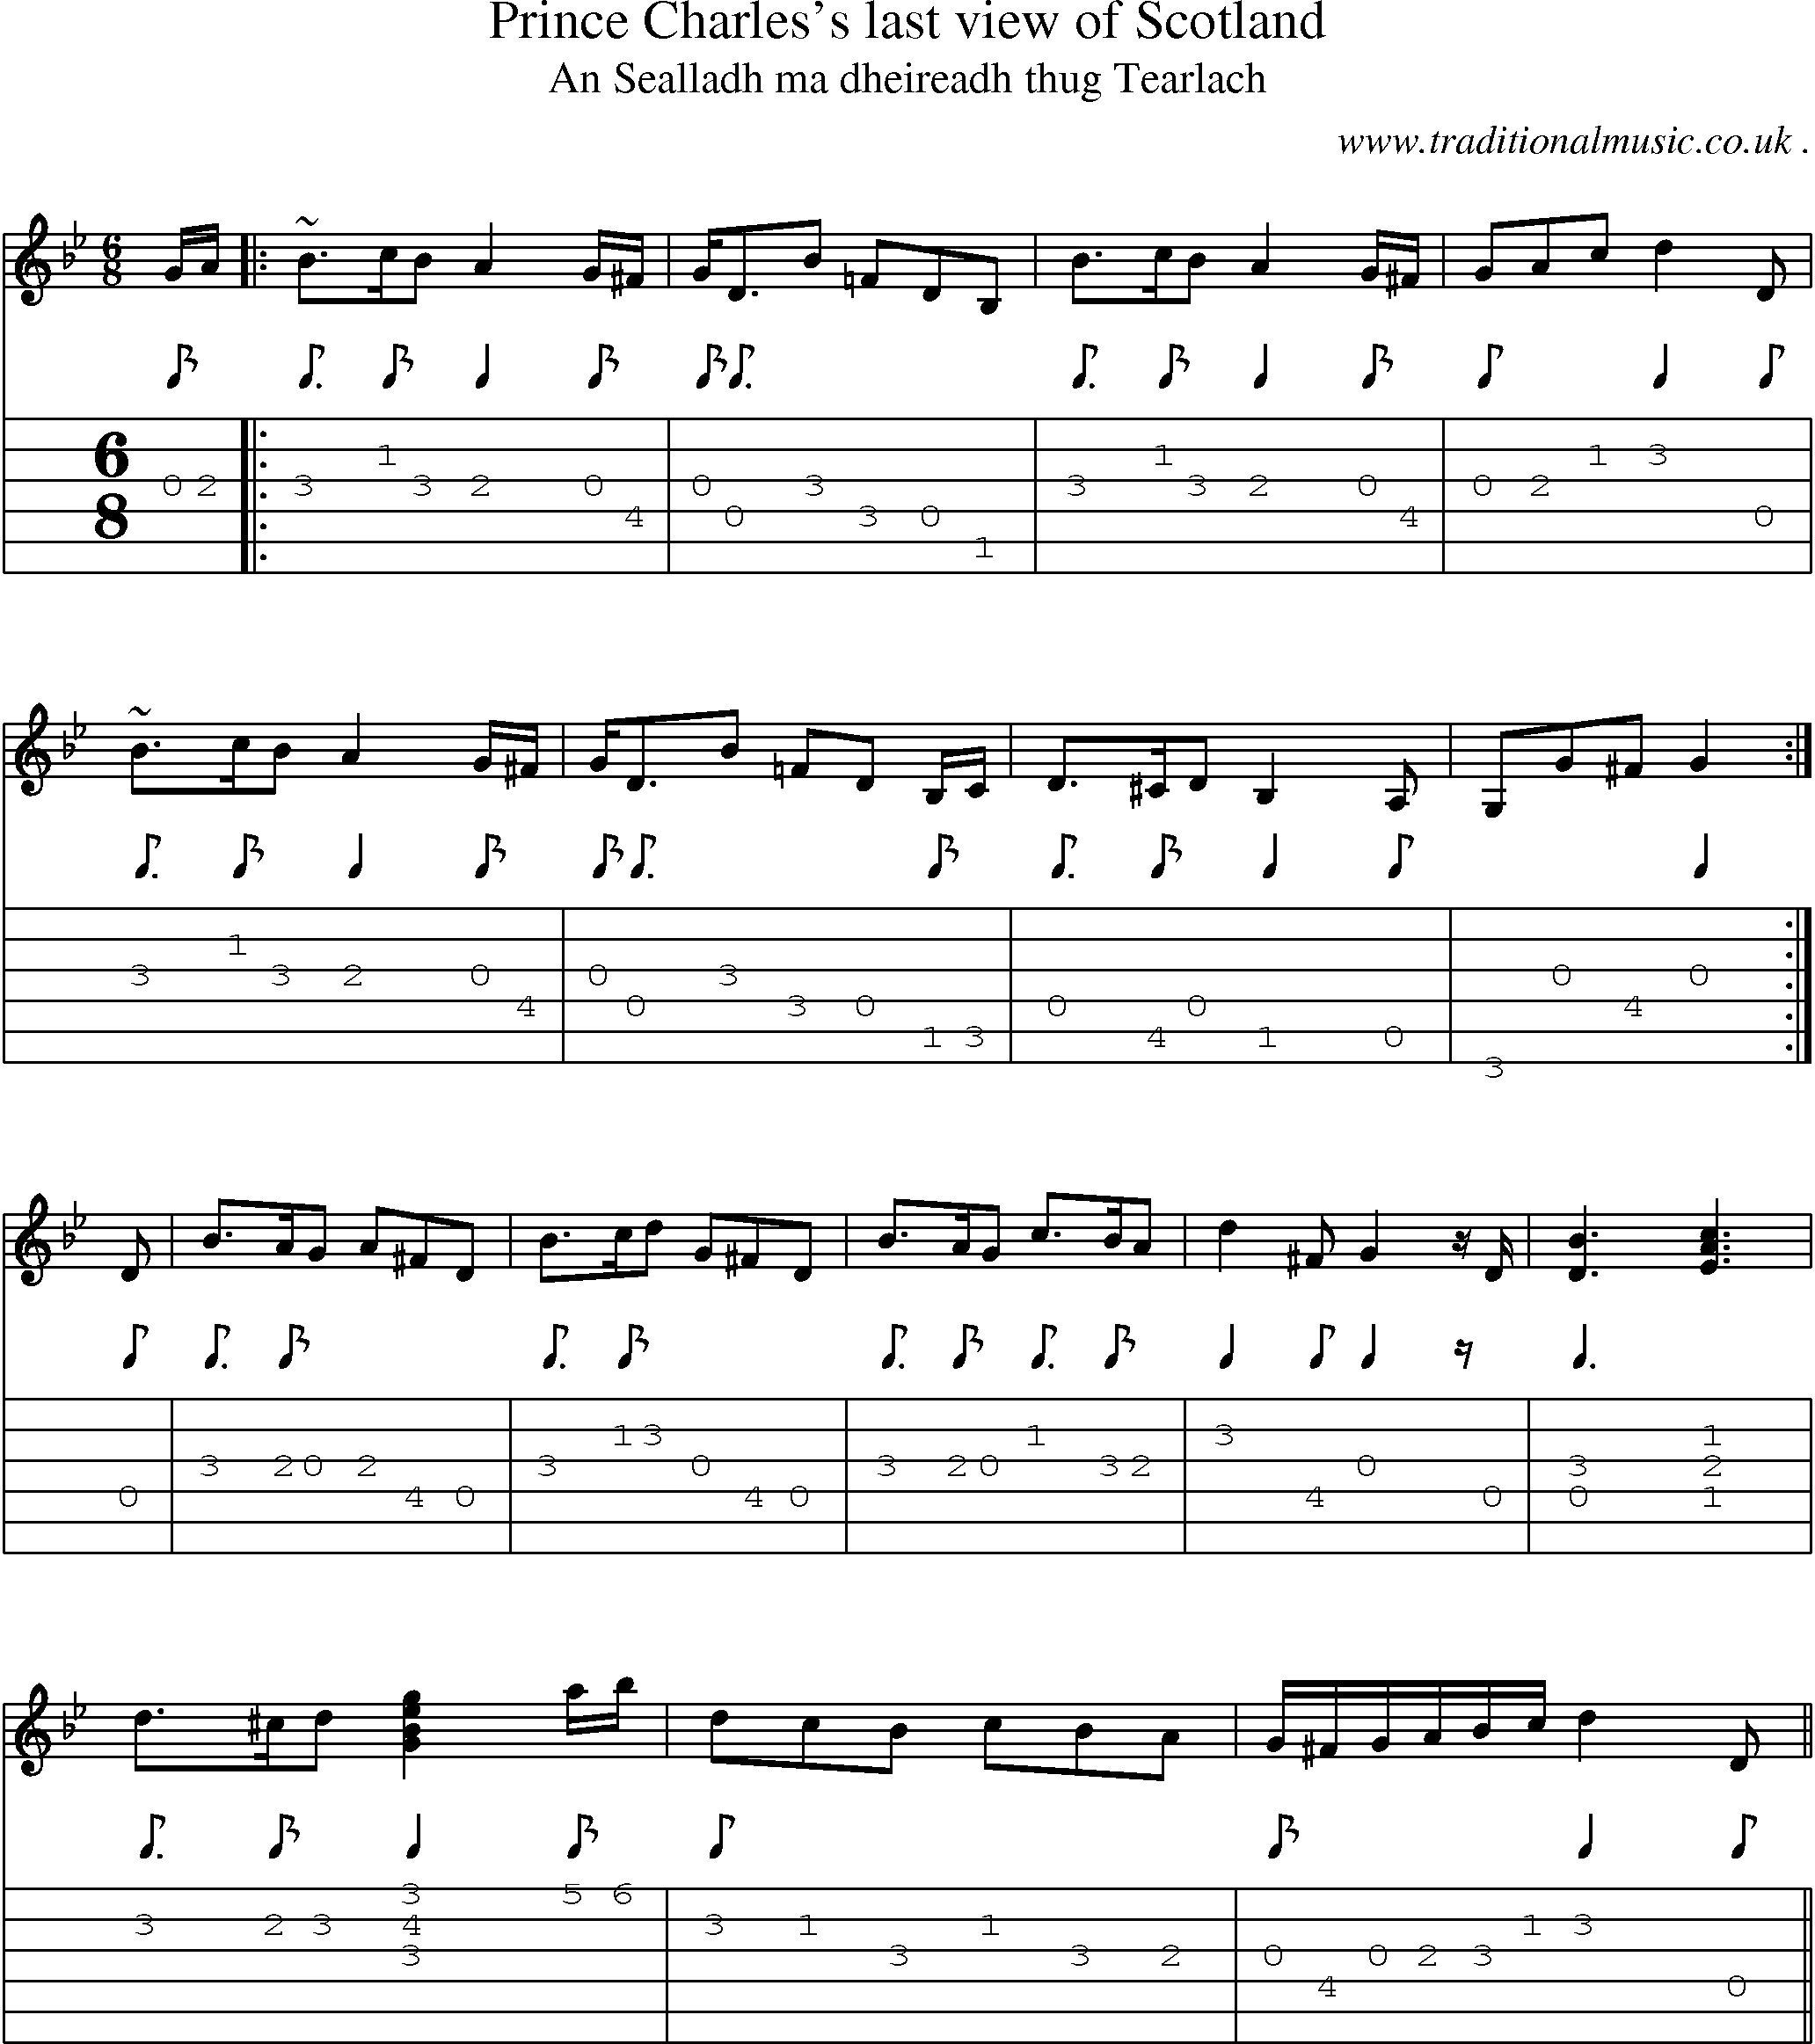 Sheet-music  score, Chords and Guitar Tabs for Prince Charless Last View Of Scotland